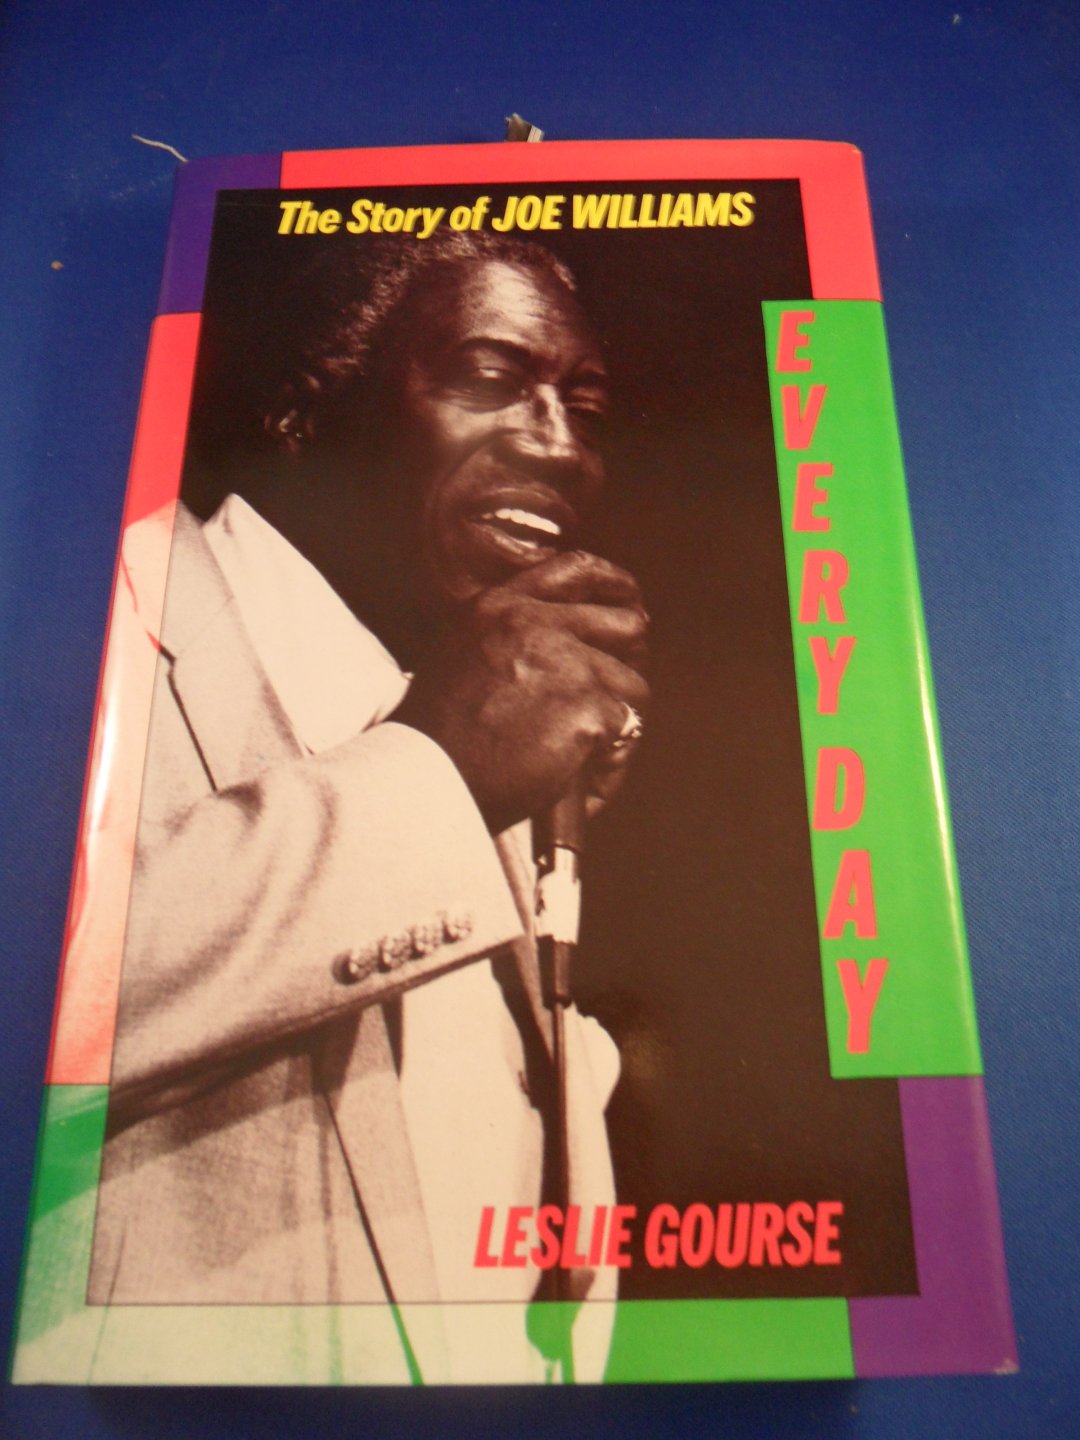 Gourse, Leslie - Every day. The story of Joe Williams